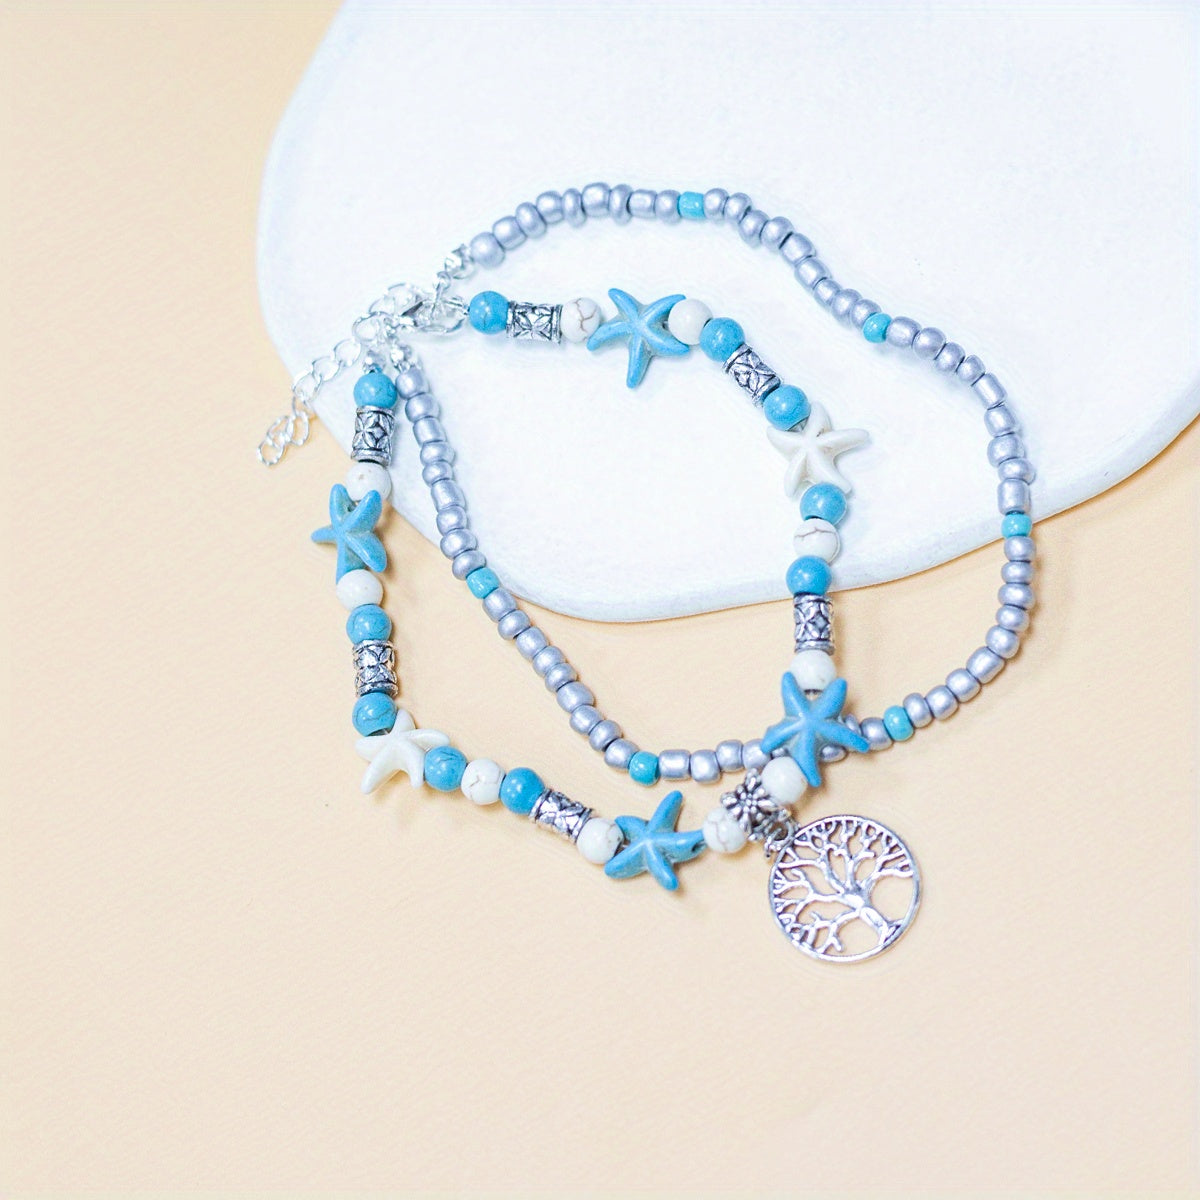 Add a Touch of Beachy Charm with our Colorful Beaded Anklet Chain - Featuring Starfish and Turtle Charms, Adjustable Size, Perfect for Women and Girls